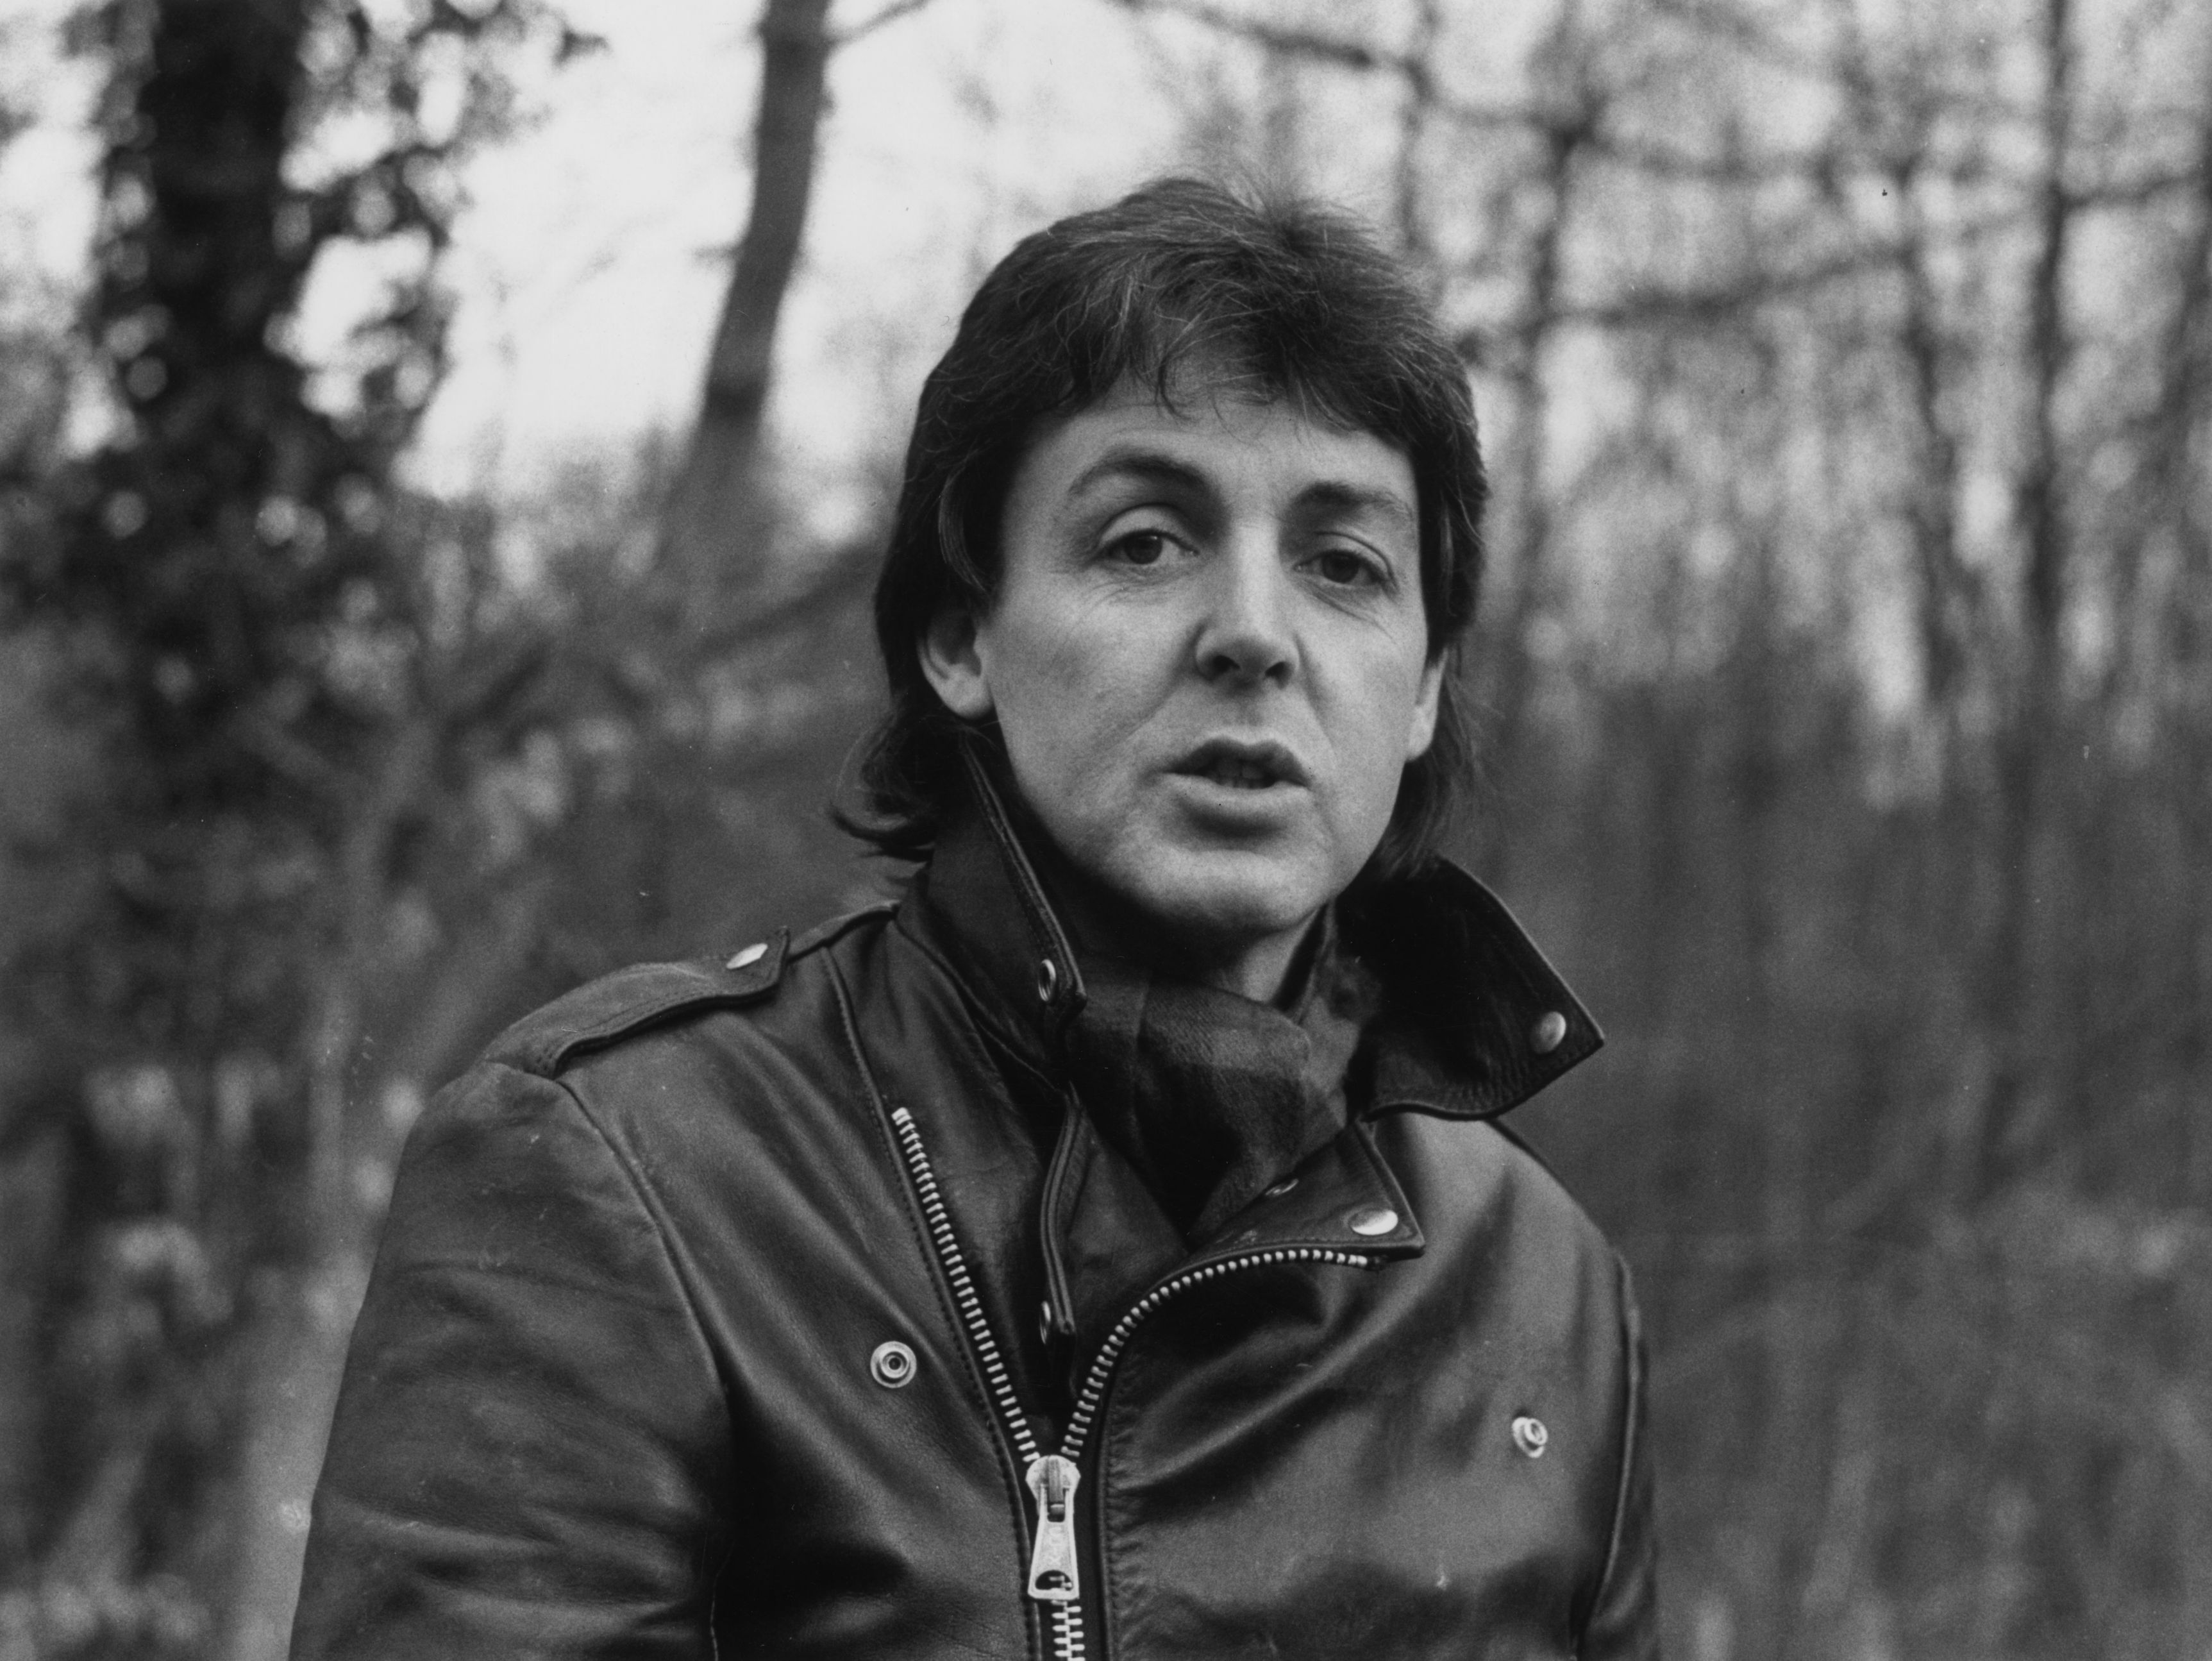 Paul McCartney pictured on his farm near Rye, Sussex. 1980. | Photo: Getty Images